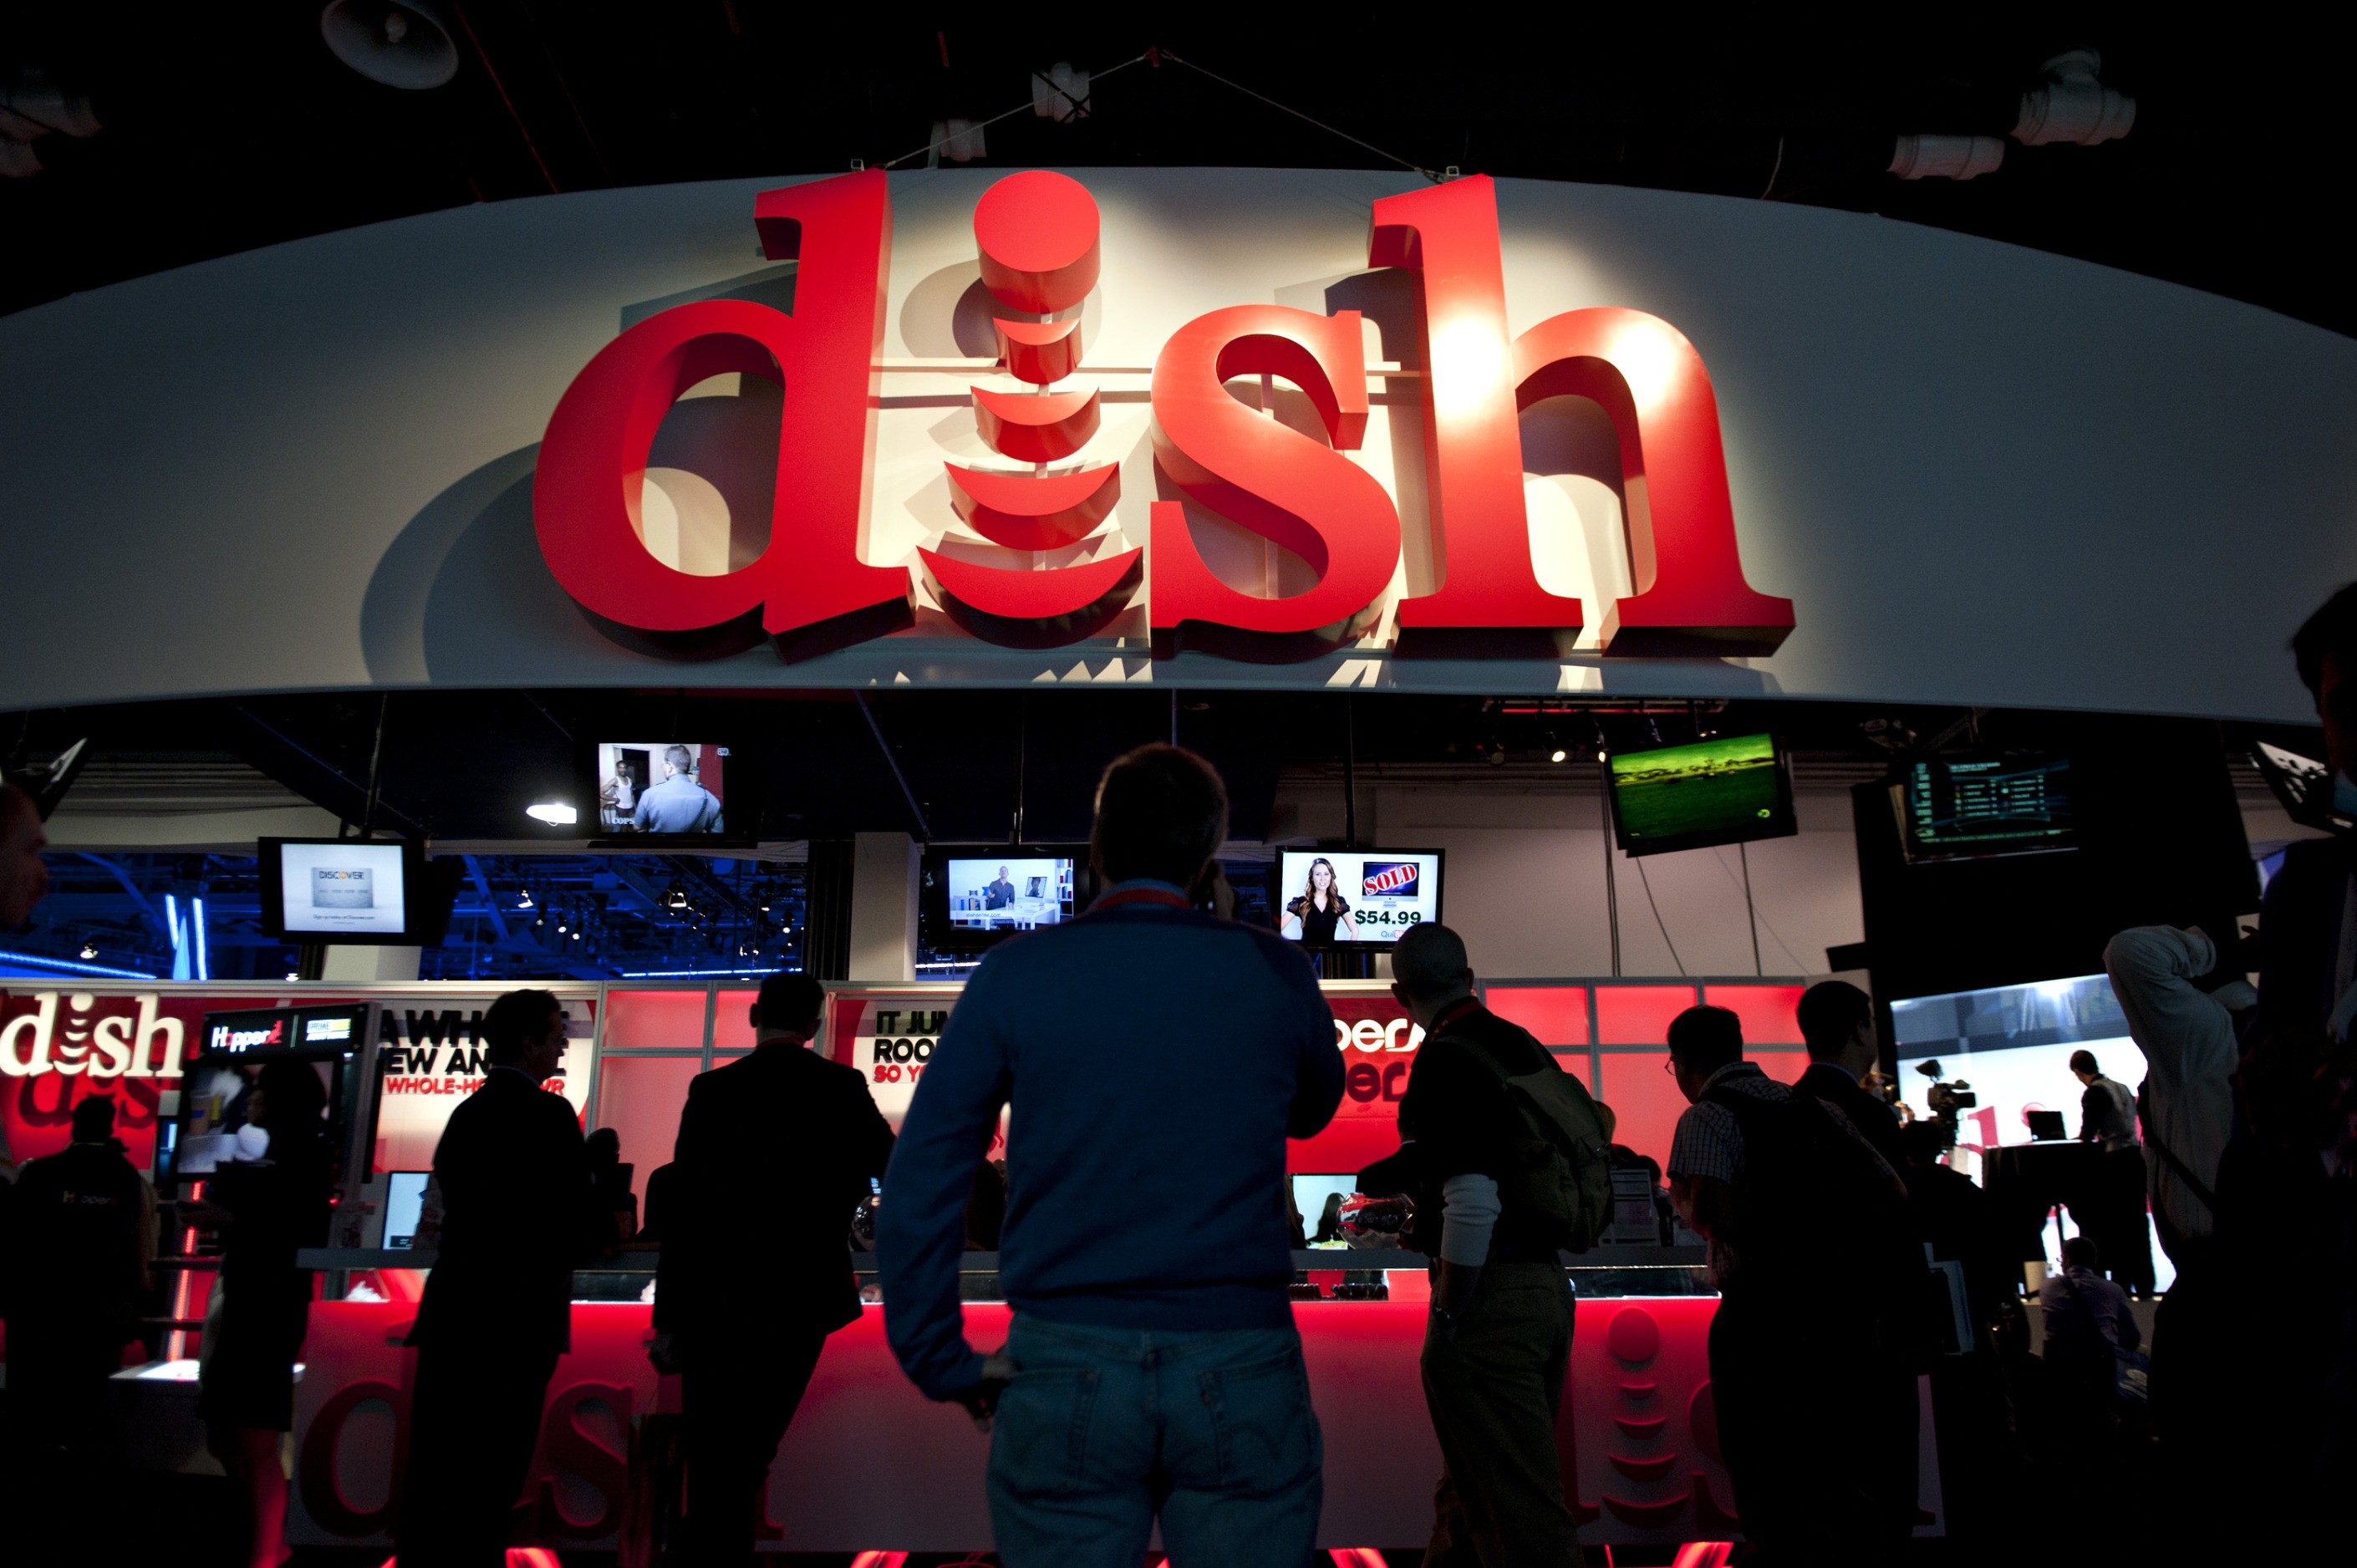 Dish Says It Met US Deadline for Mobile Network Construction